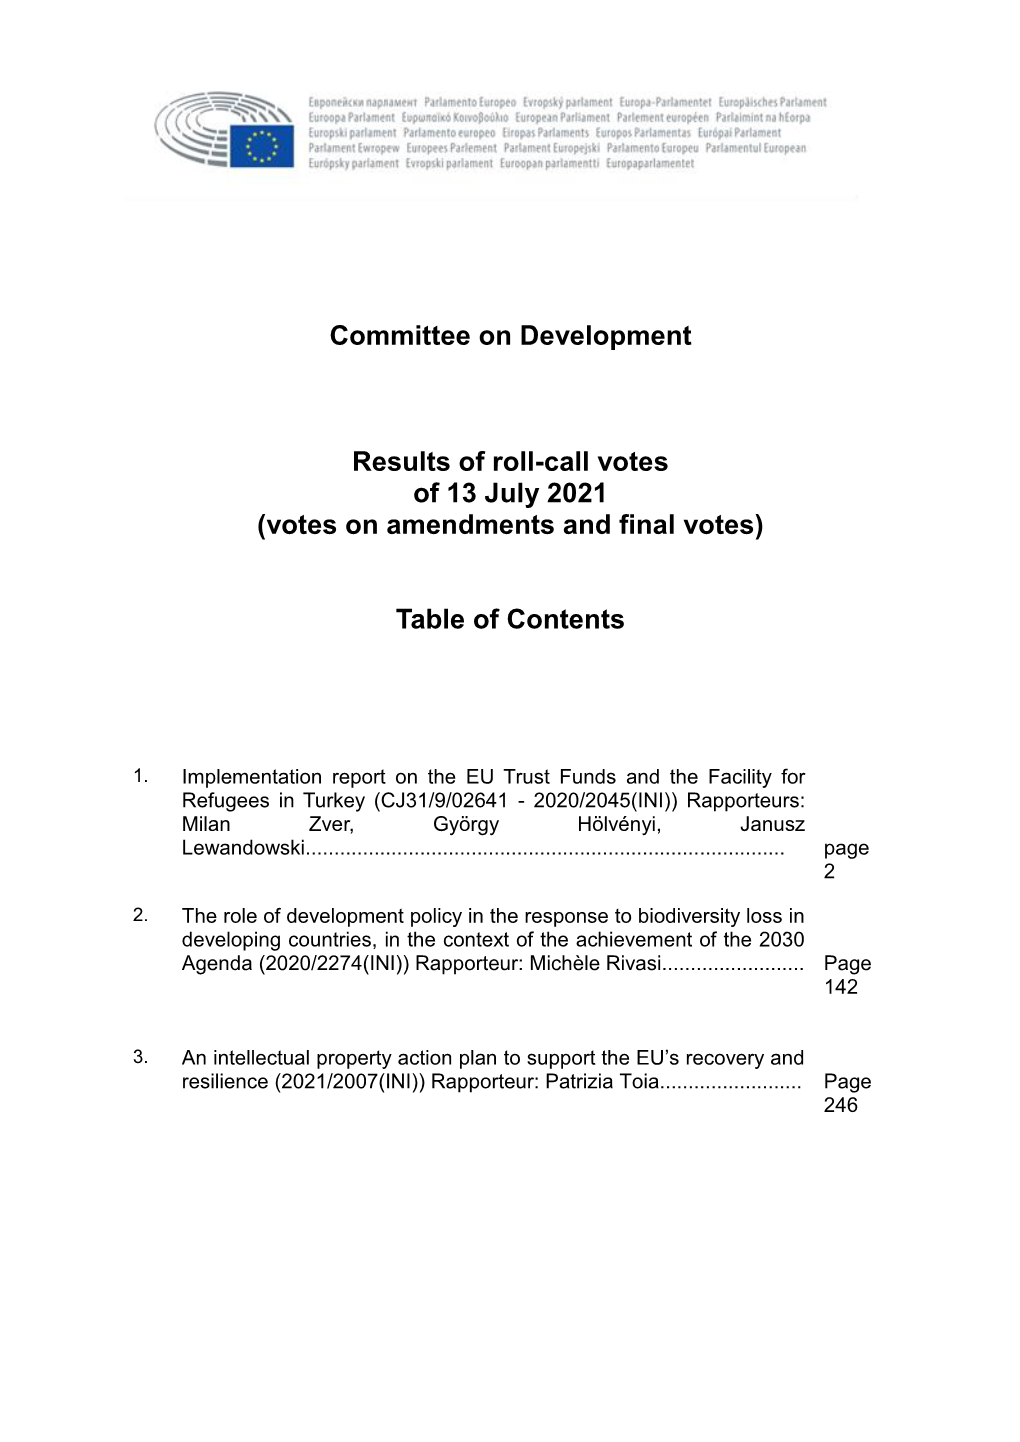 Committee on Development Results of Roll-Call Votes of 13 July 2021